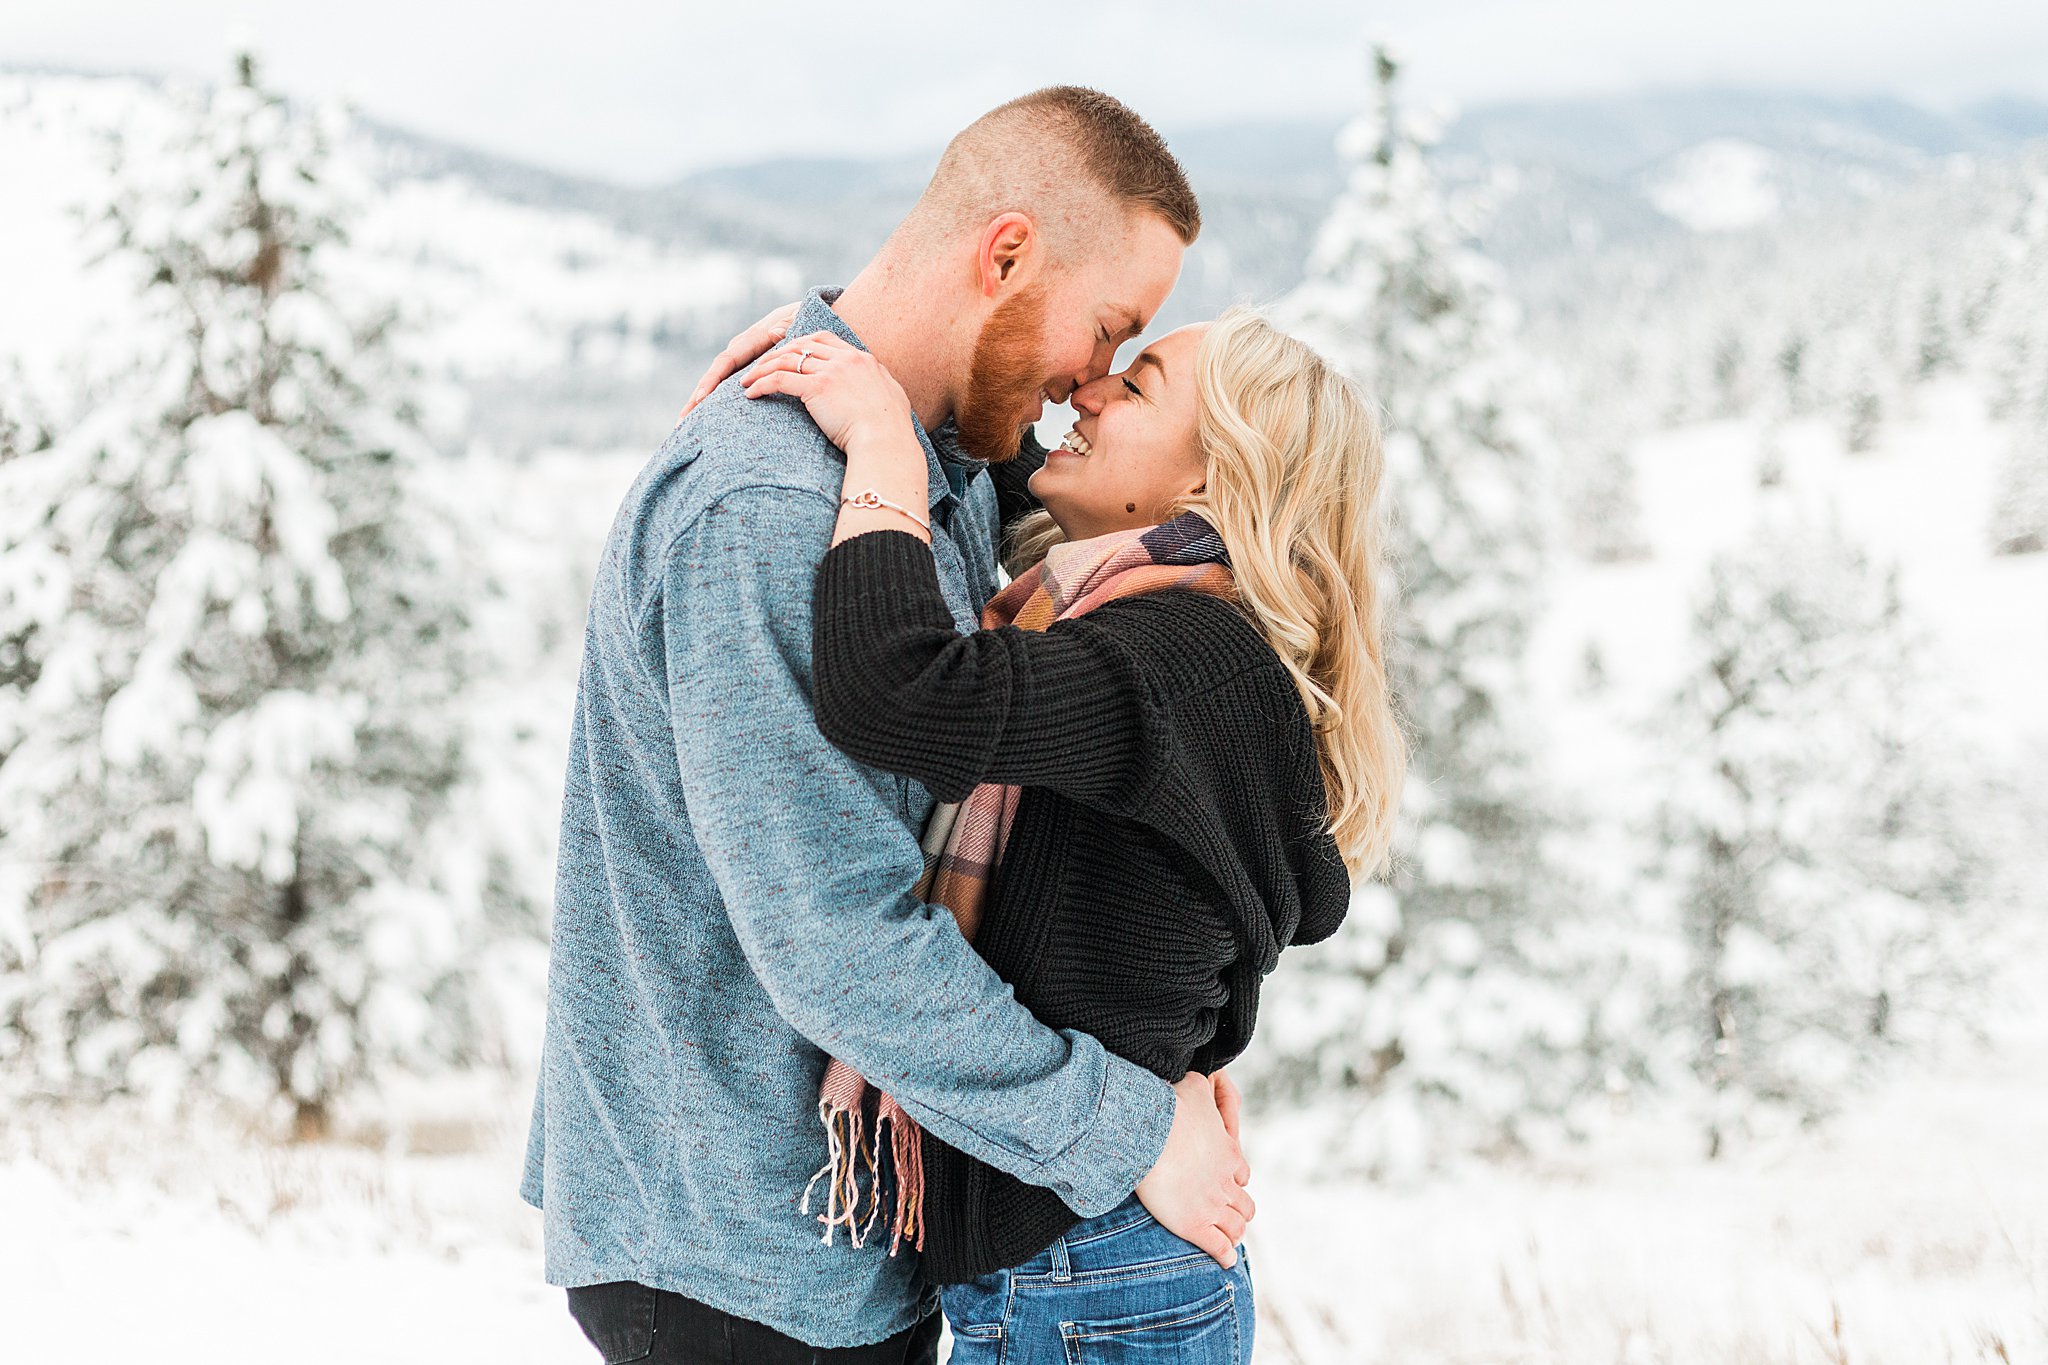 mountain engagement, engagment session in mountains, montana winter, montana engagement, engagement, engagement session, montana photoshoot, montana winter, winter engagement, winter couple session